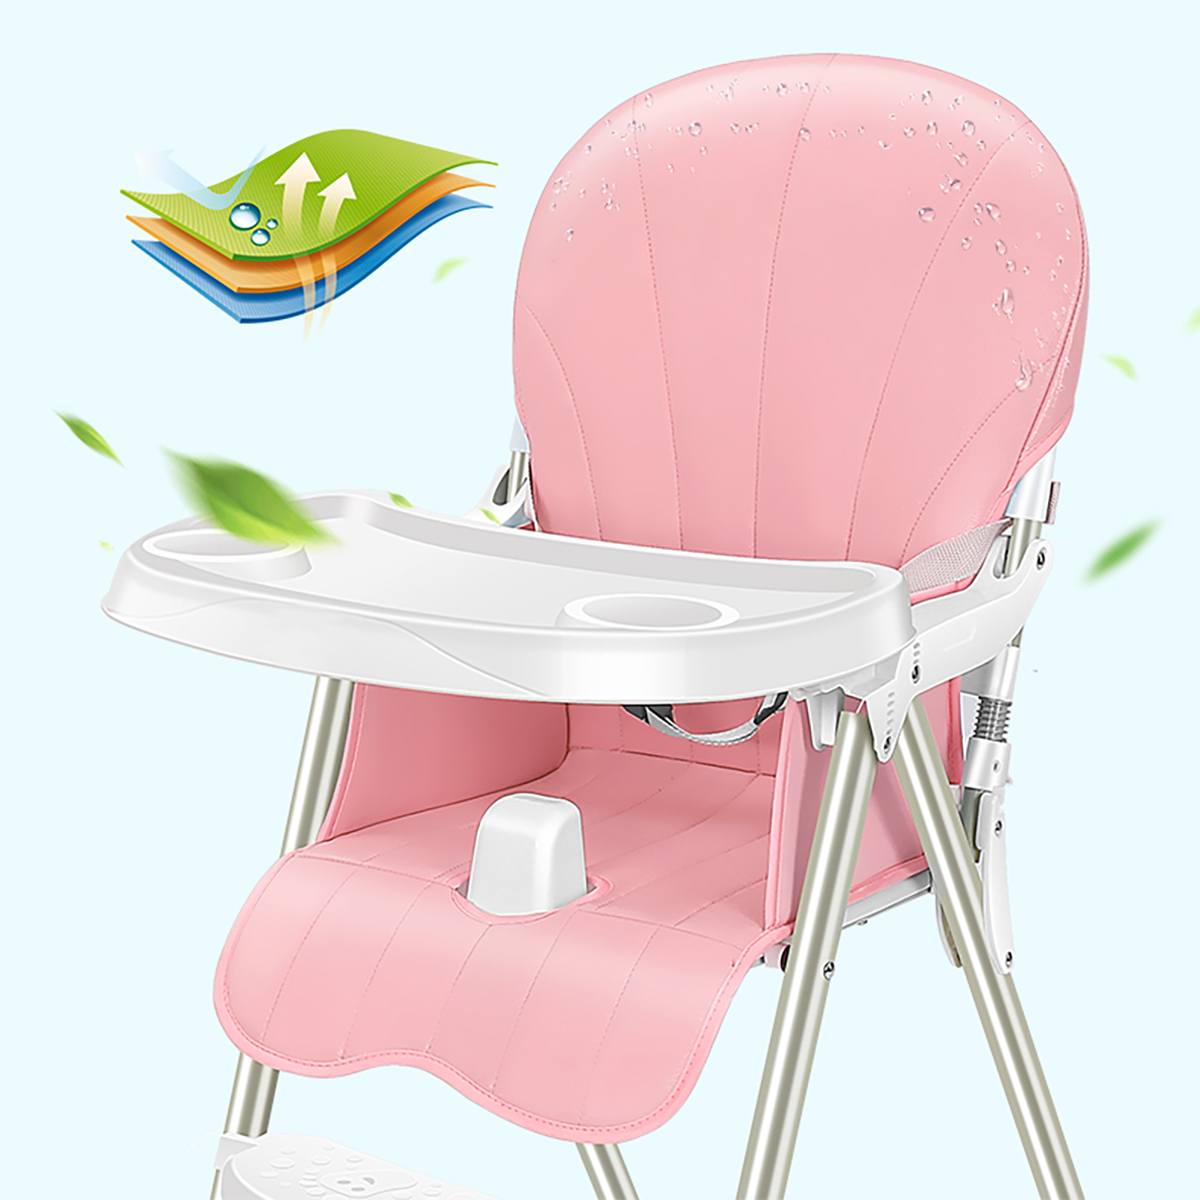 Ditong-Portable-Folding-Baby-High-Chair-Adjustable-Plate-Lockable-Wheels-PU-Seat-with-Environmental--1748389-5